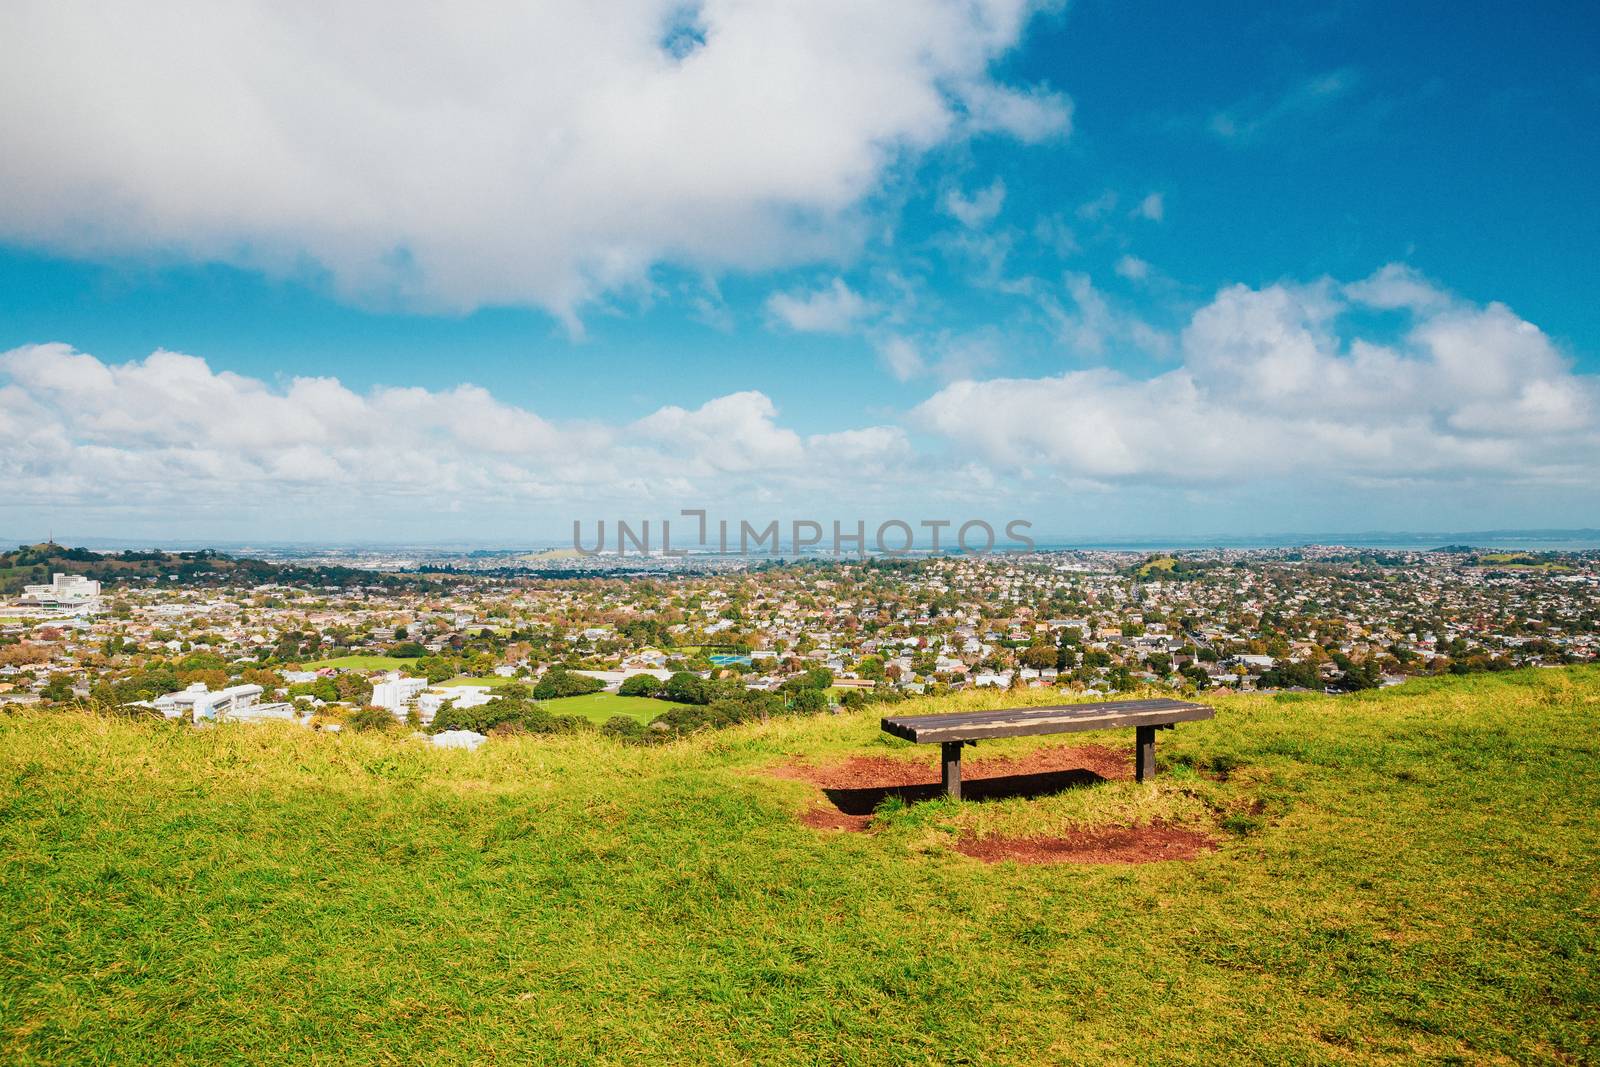 Auckland view from Mt Eden with a person walking along the path towards the city, New Zealand